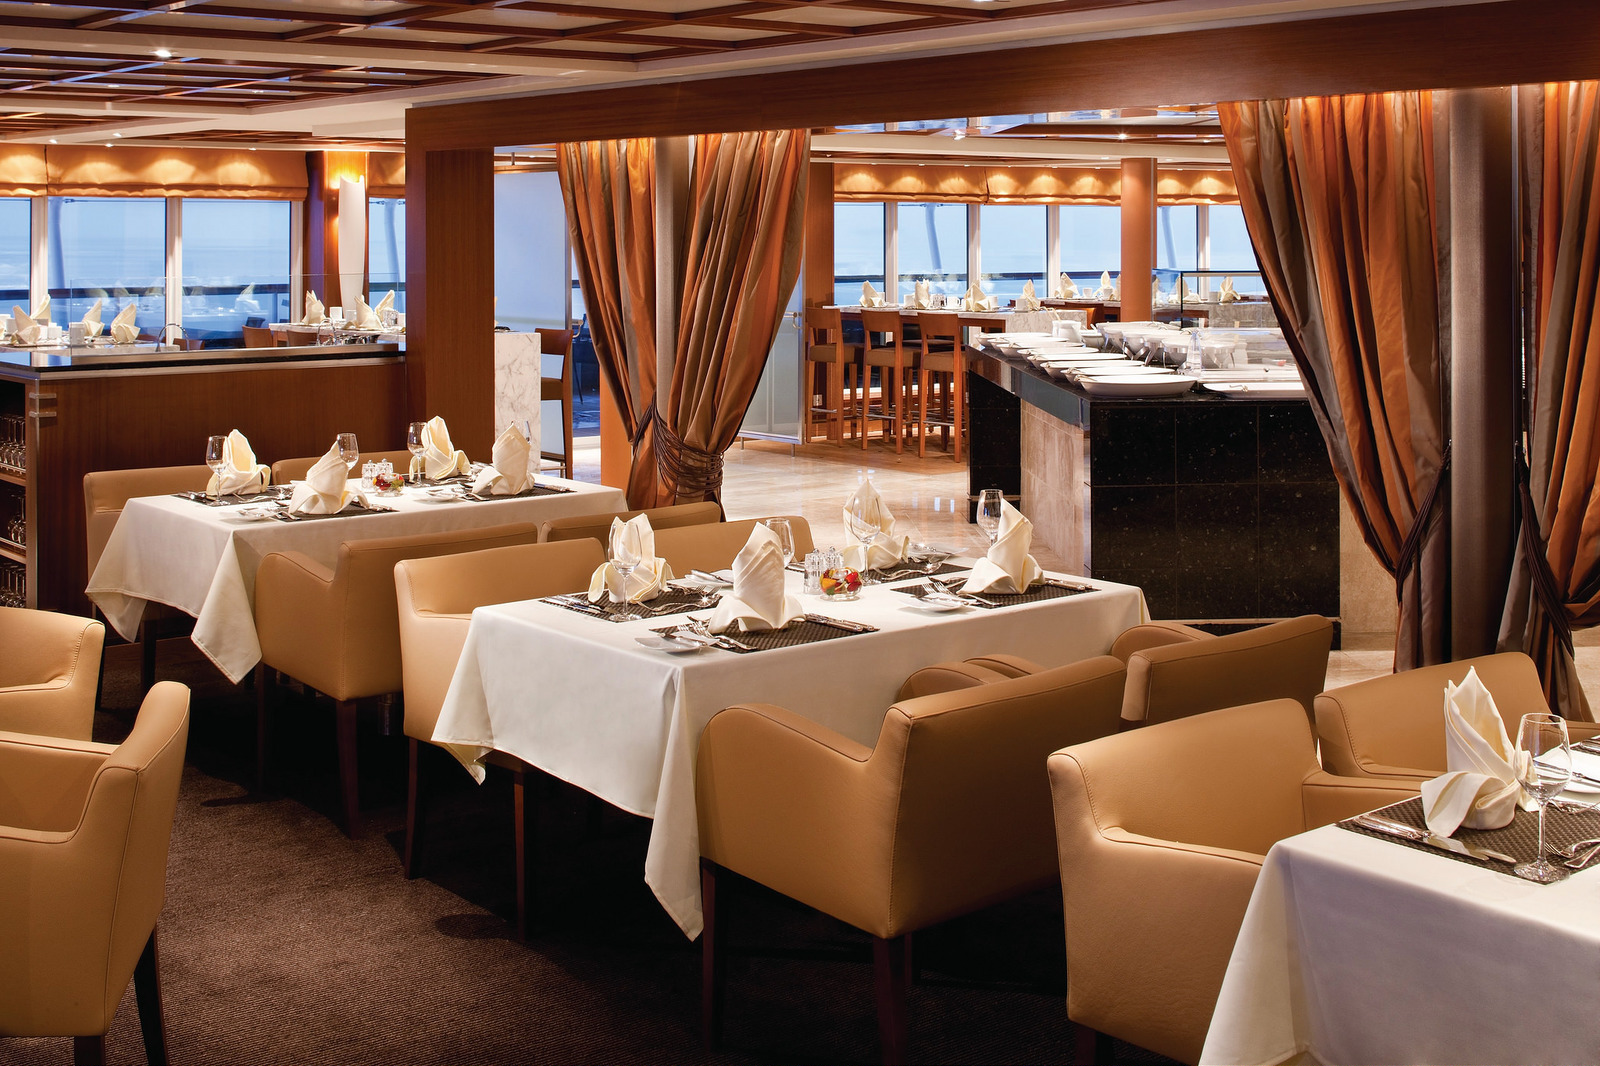 The Colonnade - Seabourn Quest